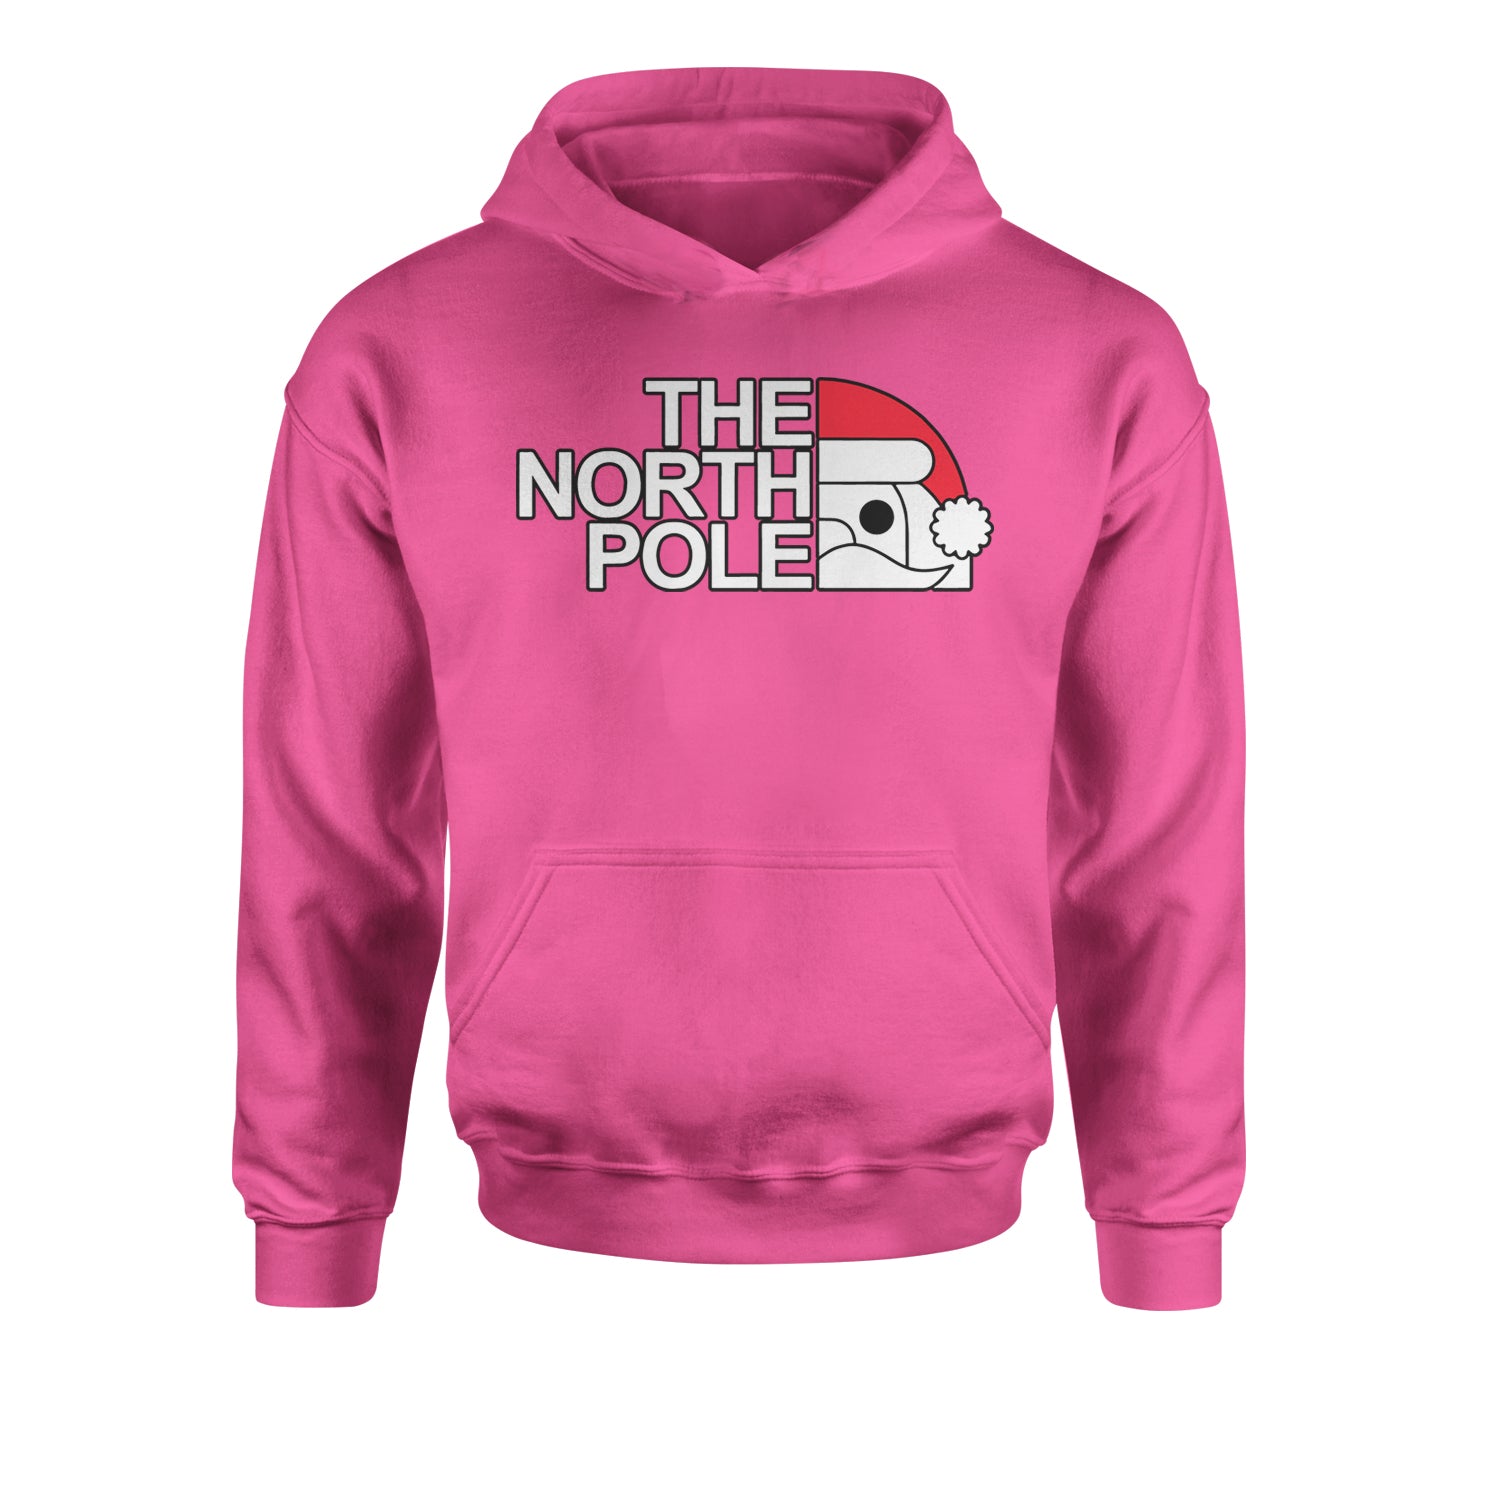 The North Pole Santa Youth-Sized Hoodie christmas, funny, nick, old, santa, st, xmas by Expression Tees